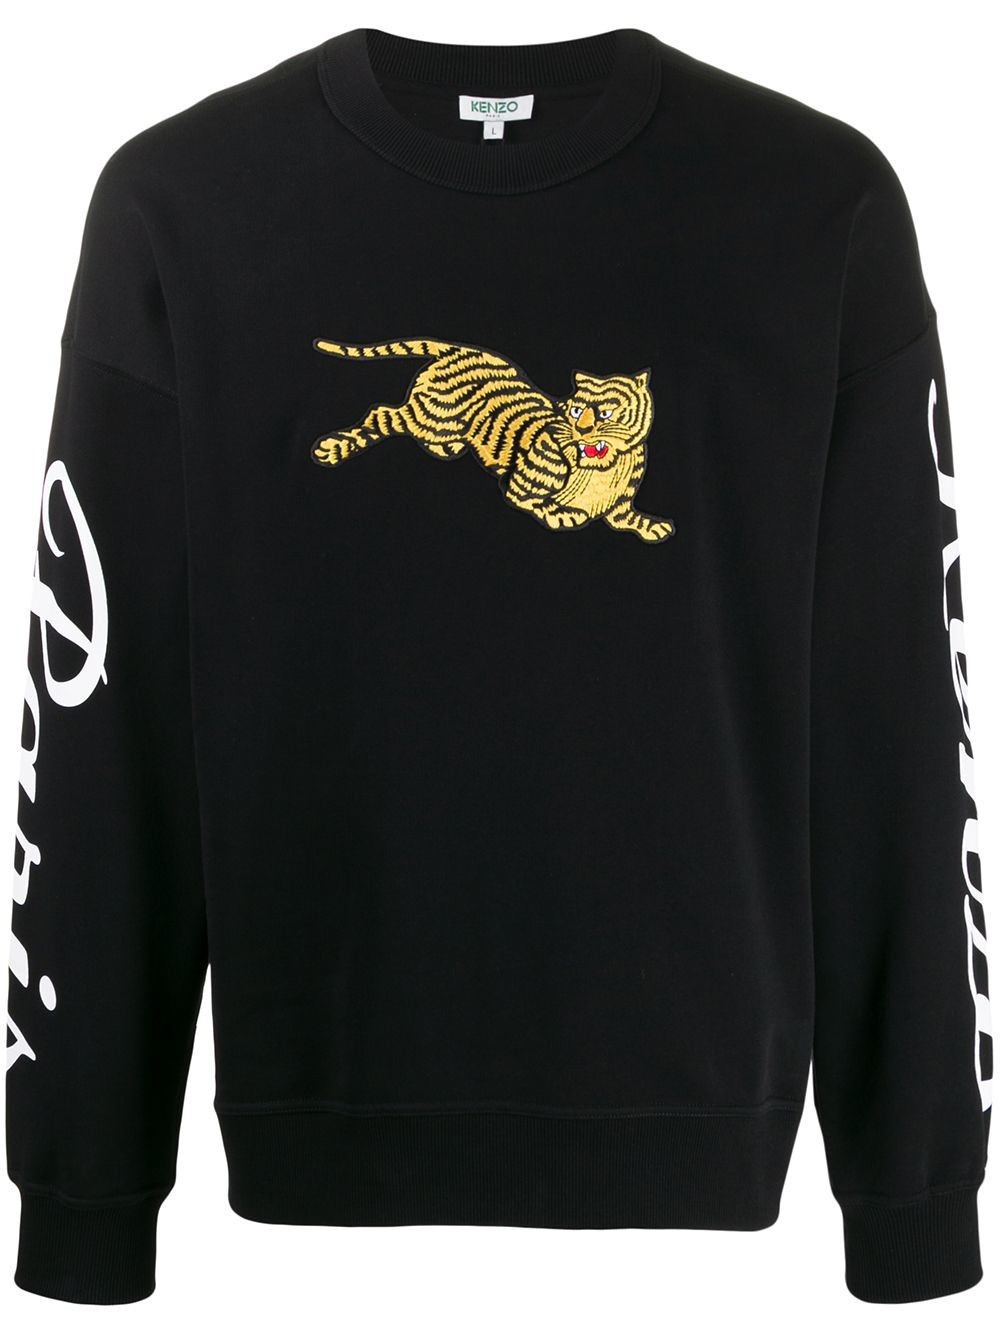 kenzo TIGER SWEATER available on montiboutique.com - 31093